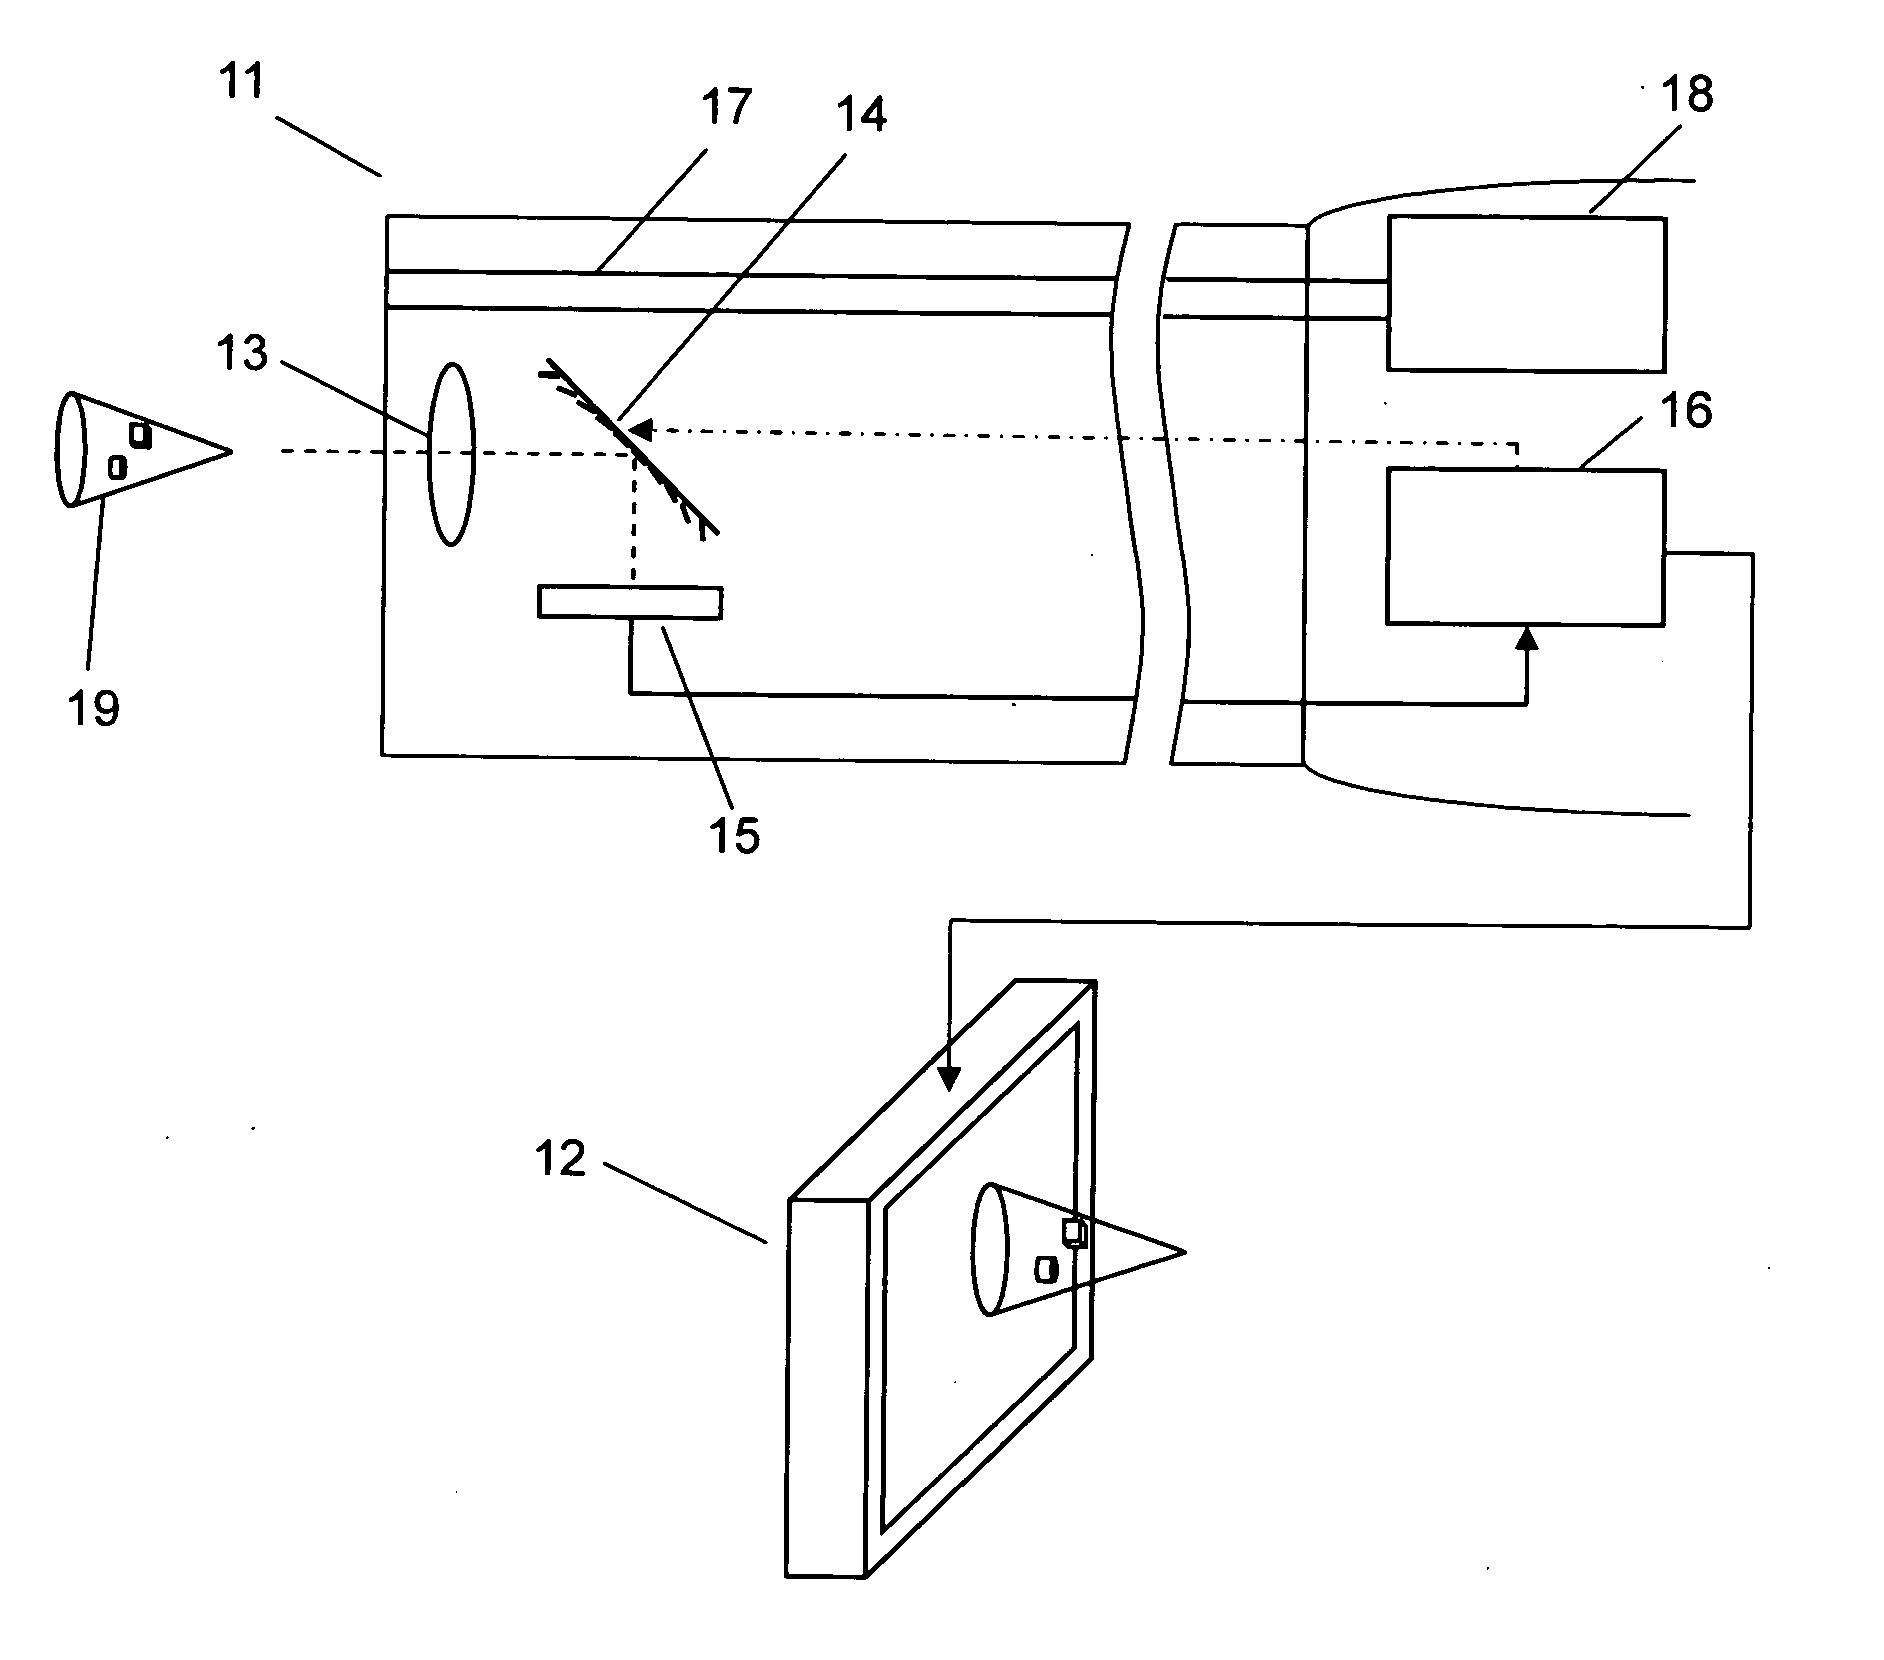 Three-dimensional endoscope imaging and display system